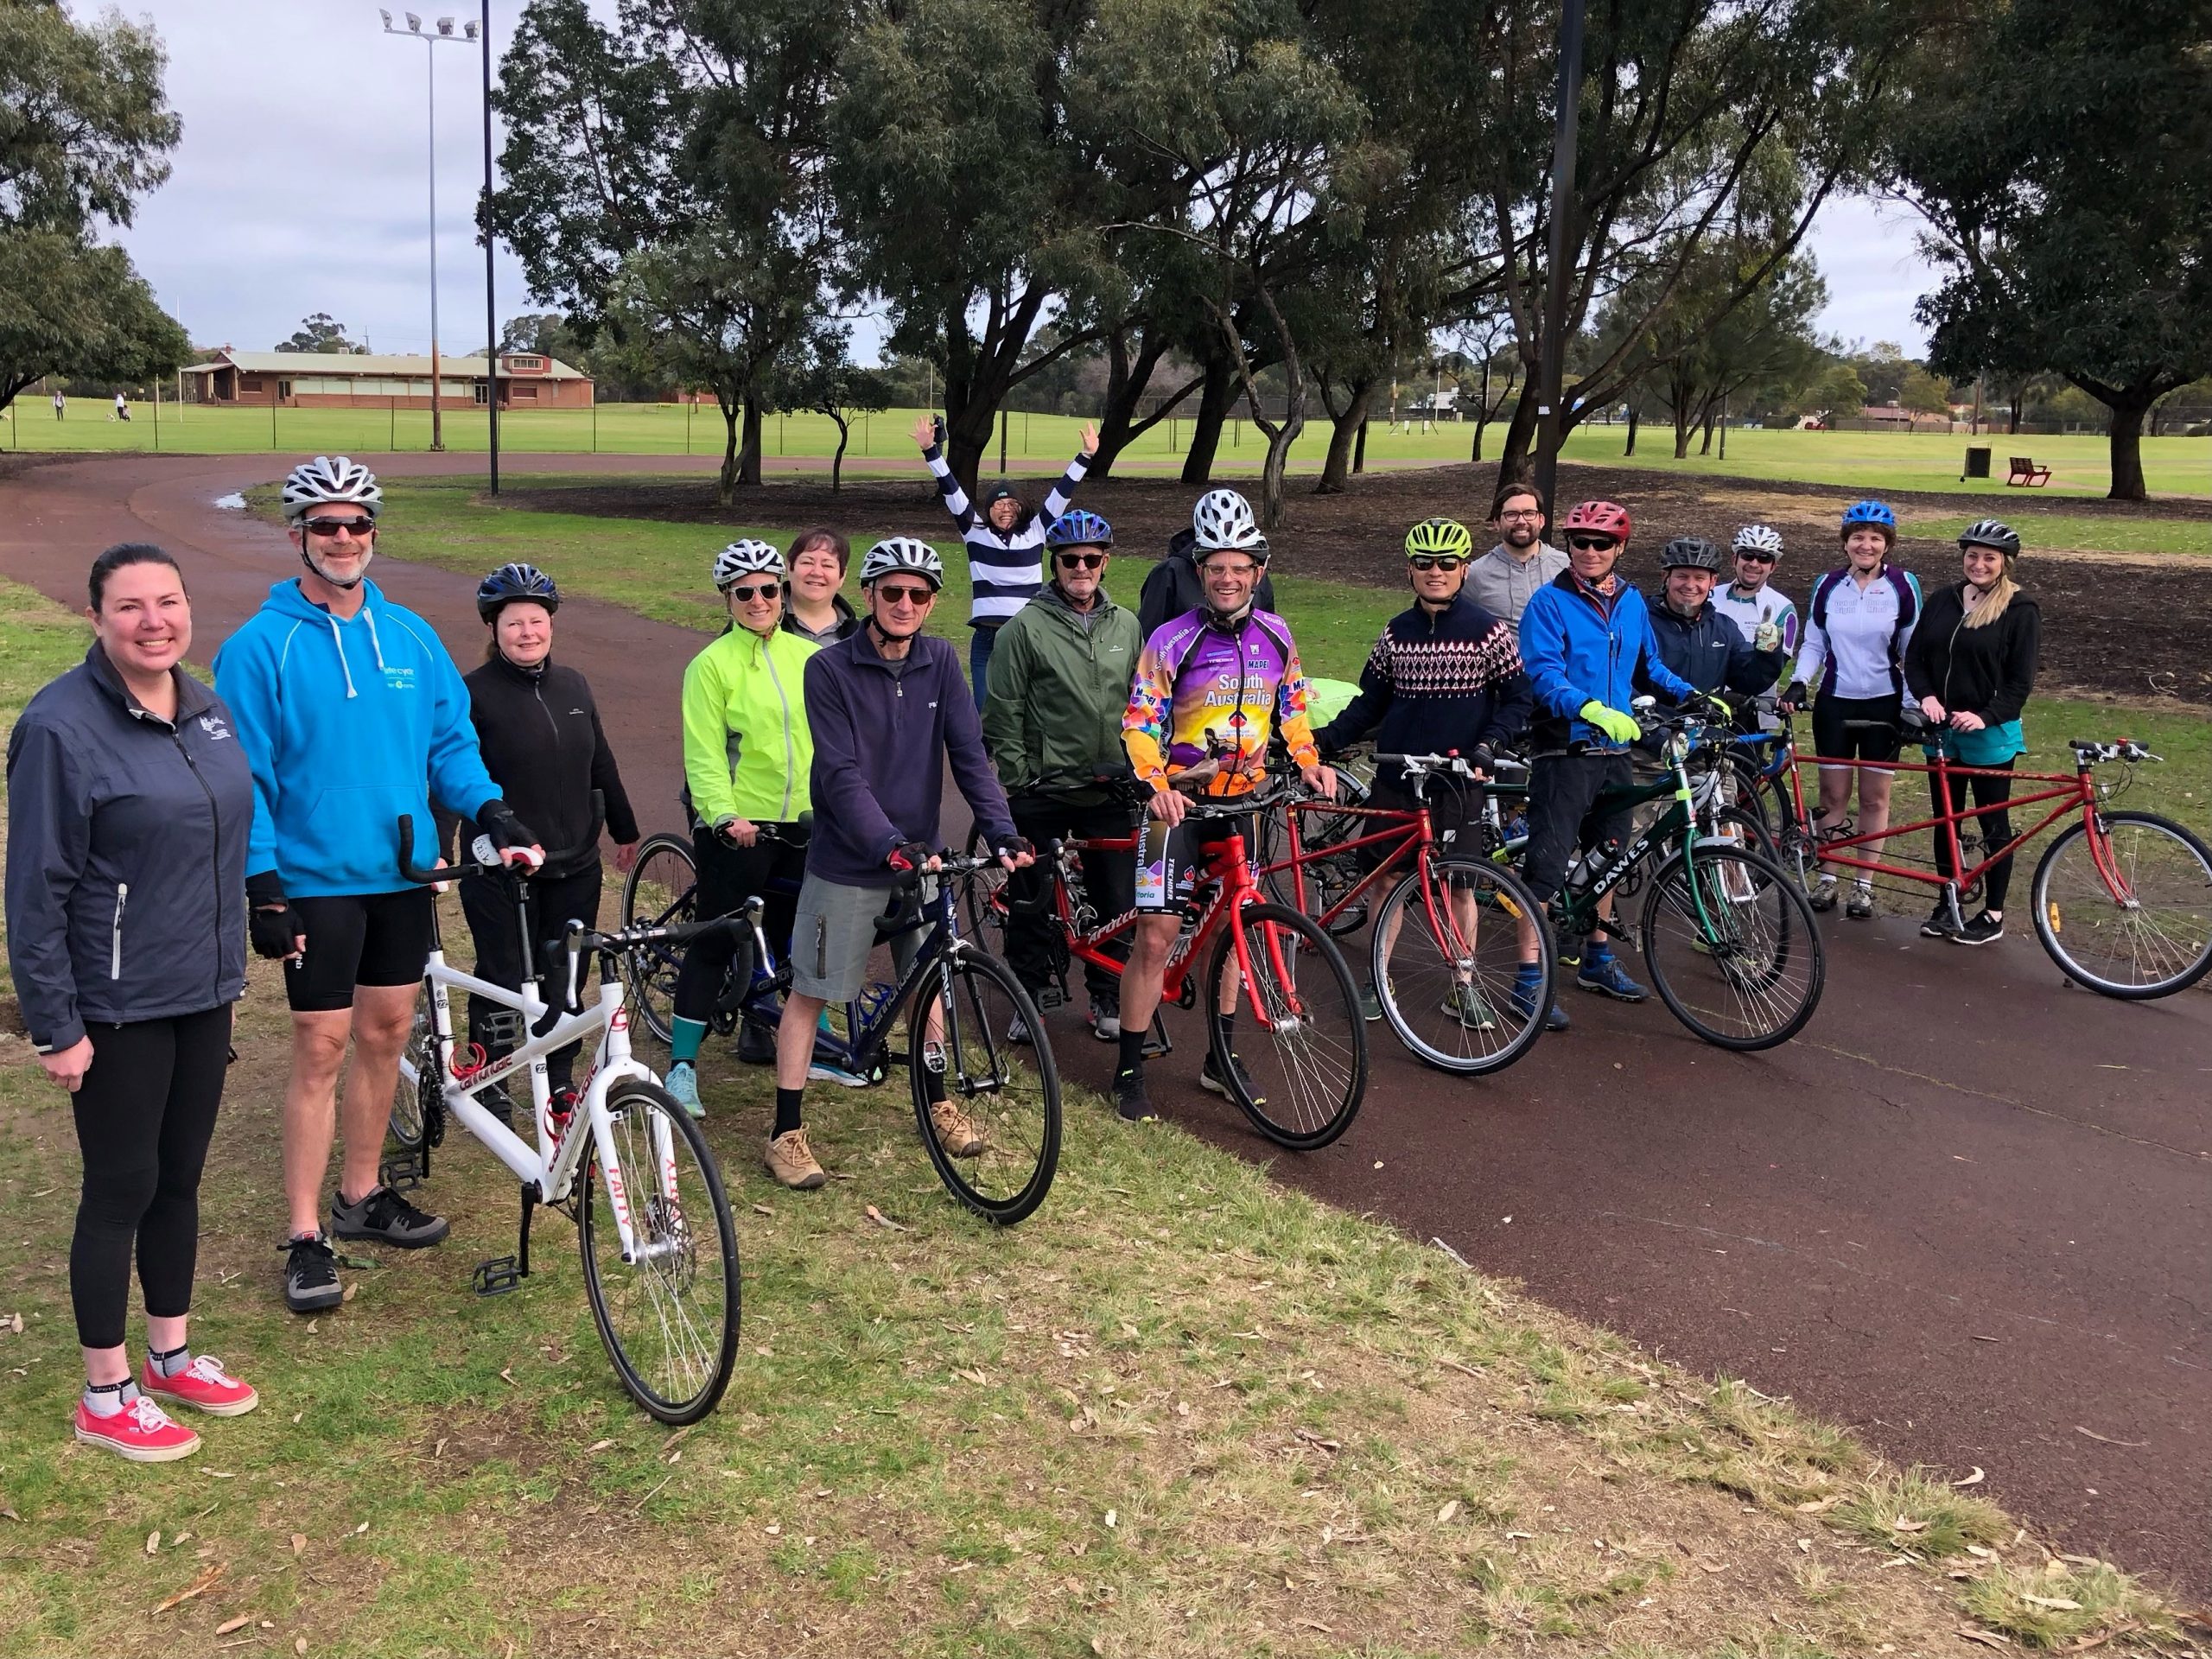 A group of 17 people stand together with 7 tandem bikes for a group photo while one member celebrates with a start jump at the back of the group. Oh what a feeling!